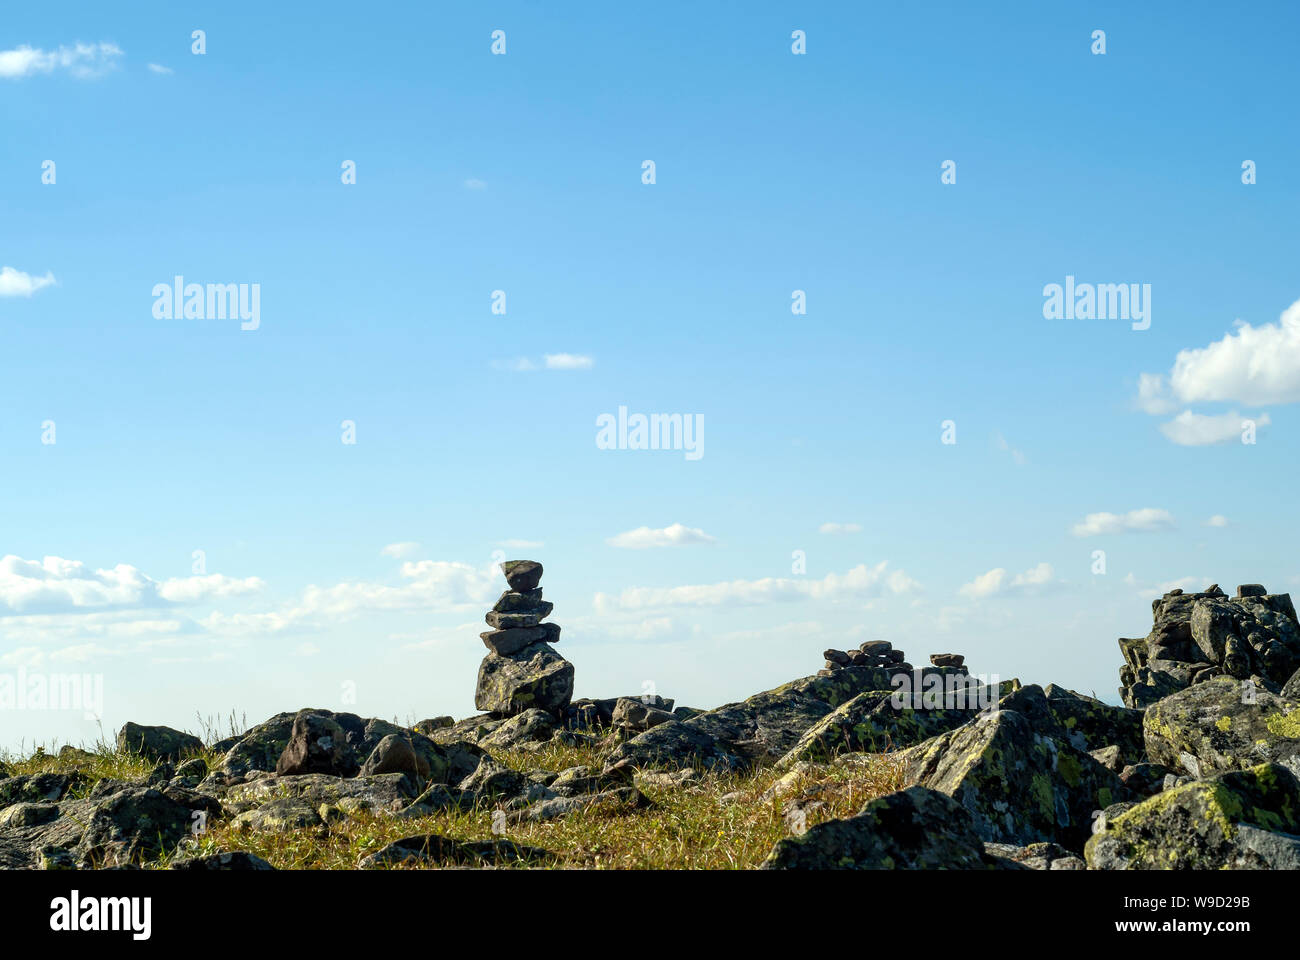 bright landscape of a high-altitude plateau with folded travelers pyramid cairn of stones under a blue sky with clouds Stock Photo